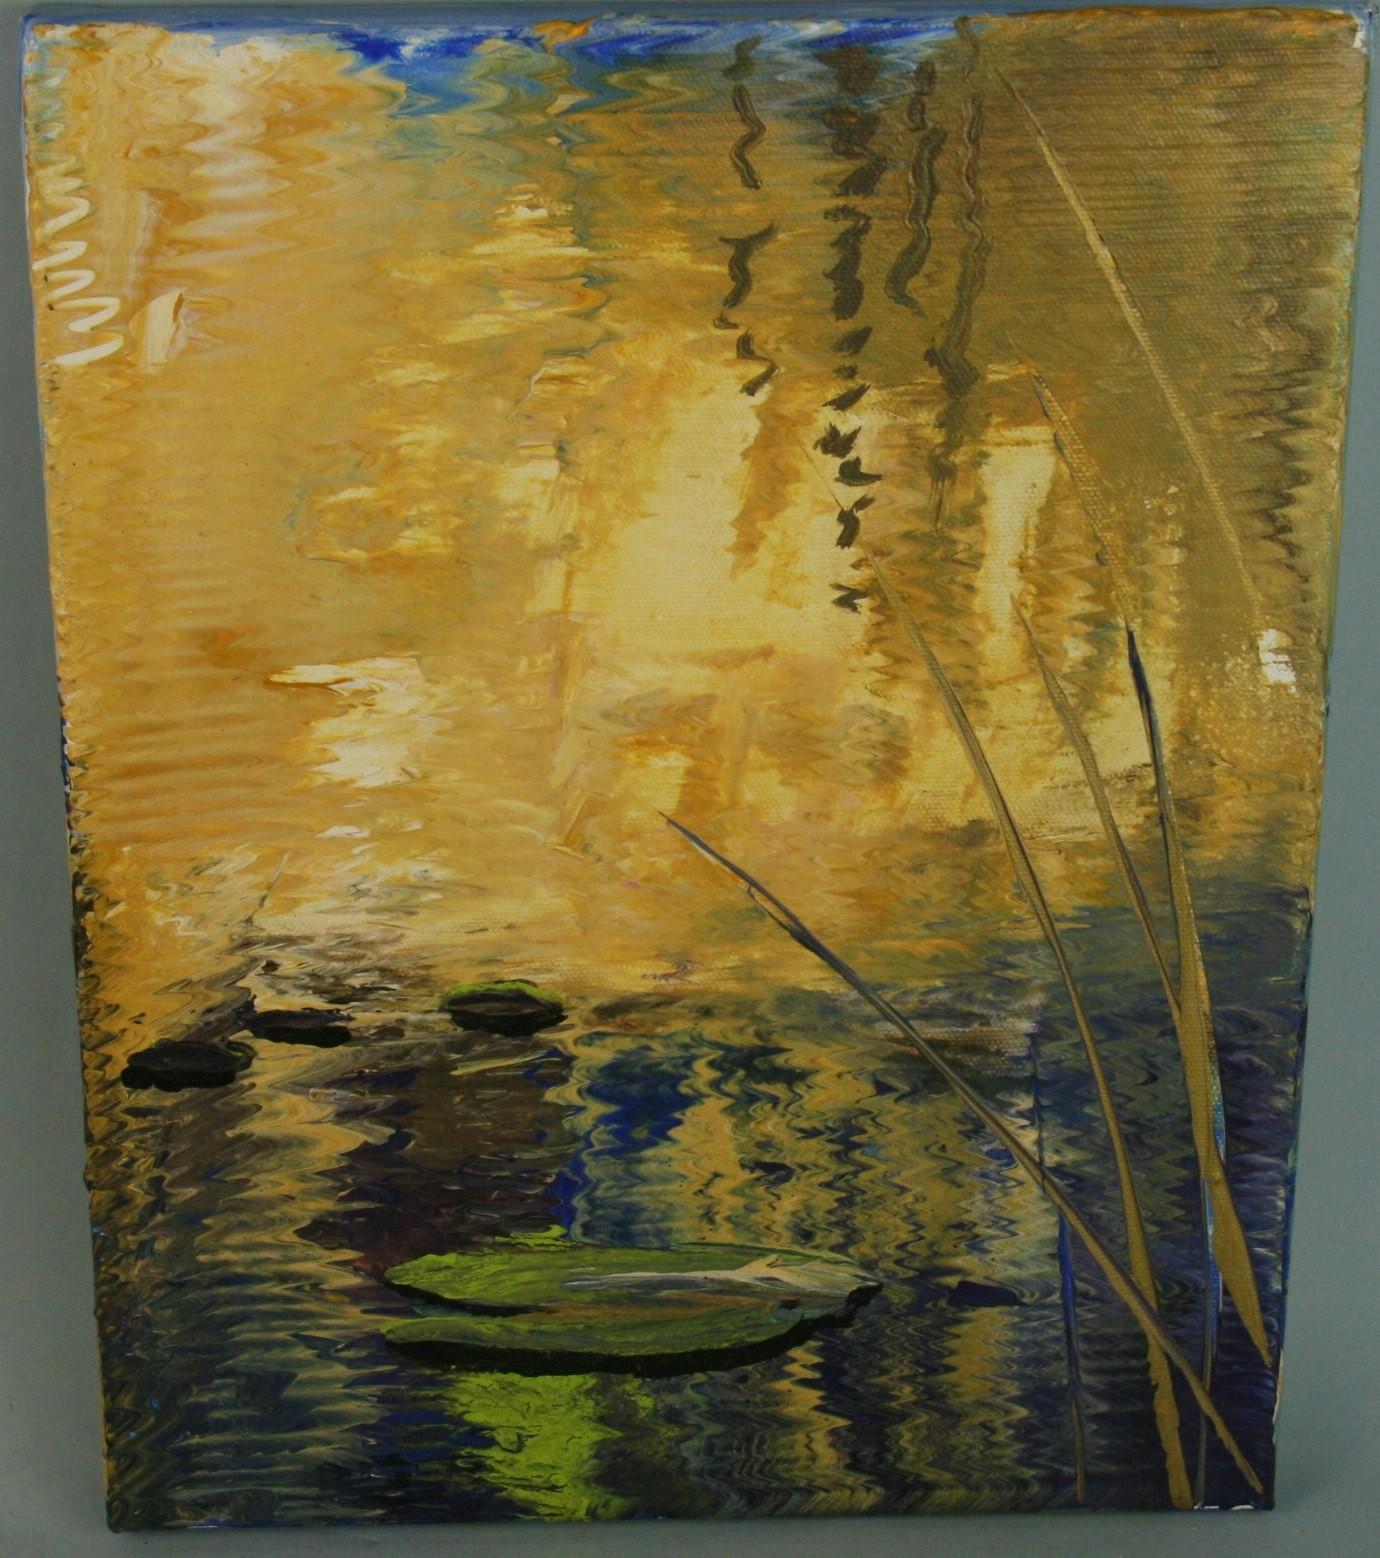 5-3250 Lilly pond oil on canvas set in a rapped canvas with painted edges.
No need for a frame 